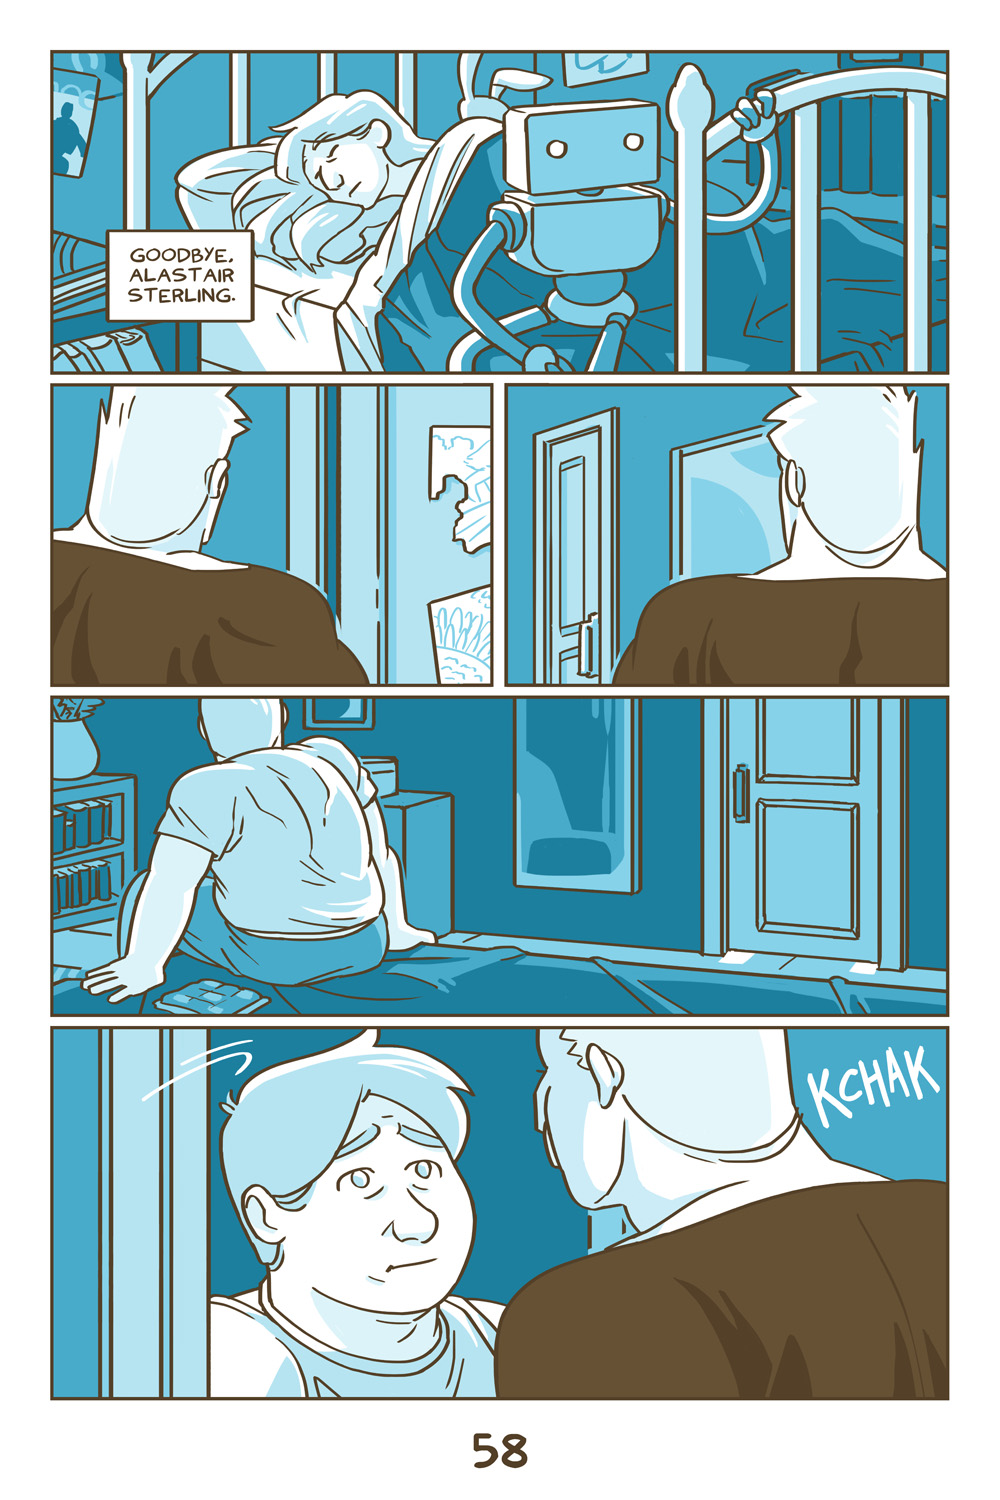 Chapter 7, Page 58